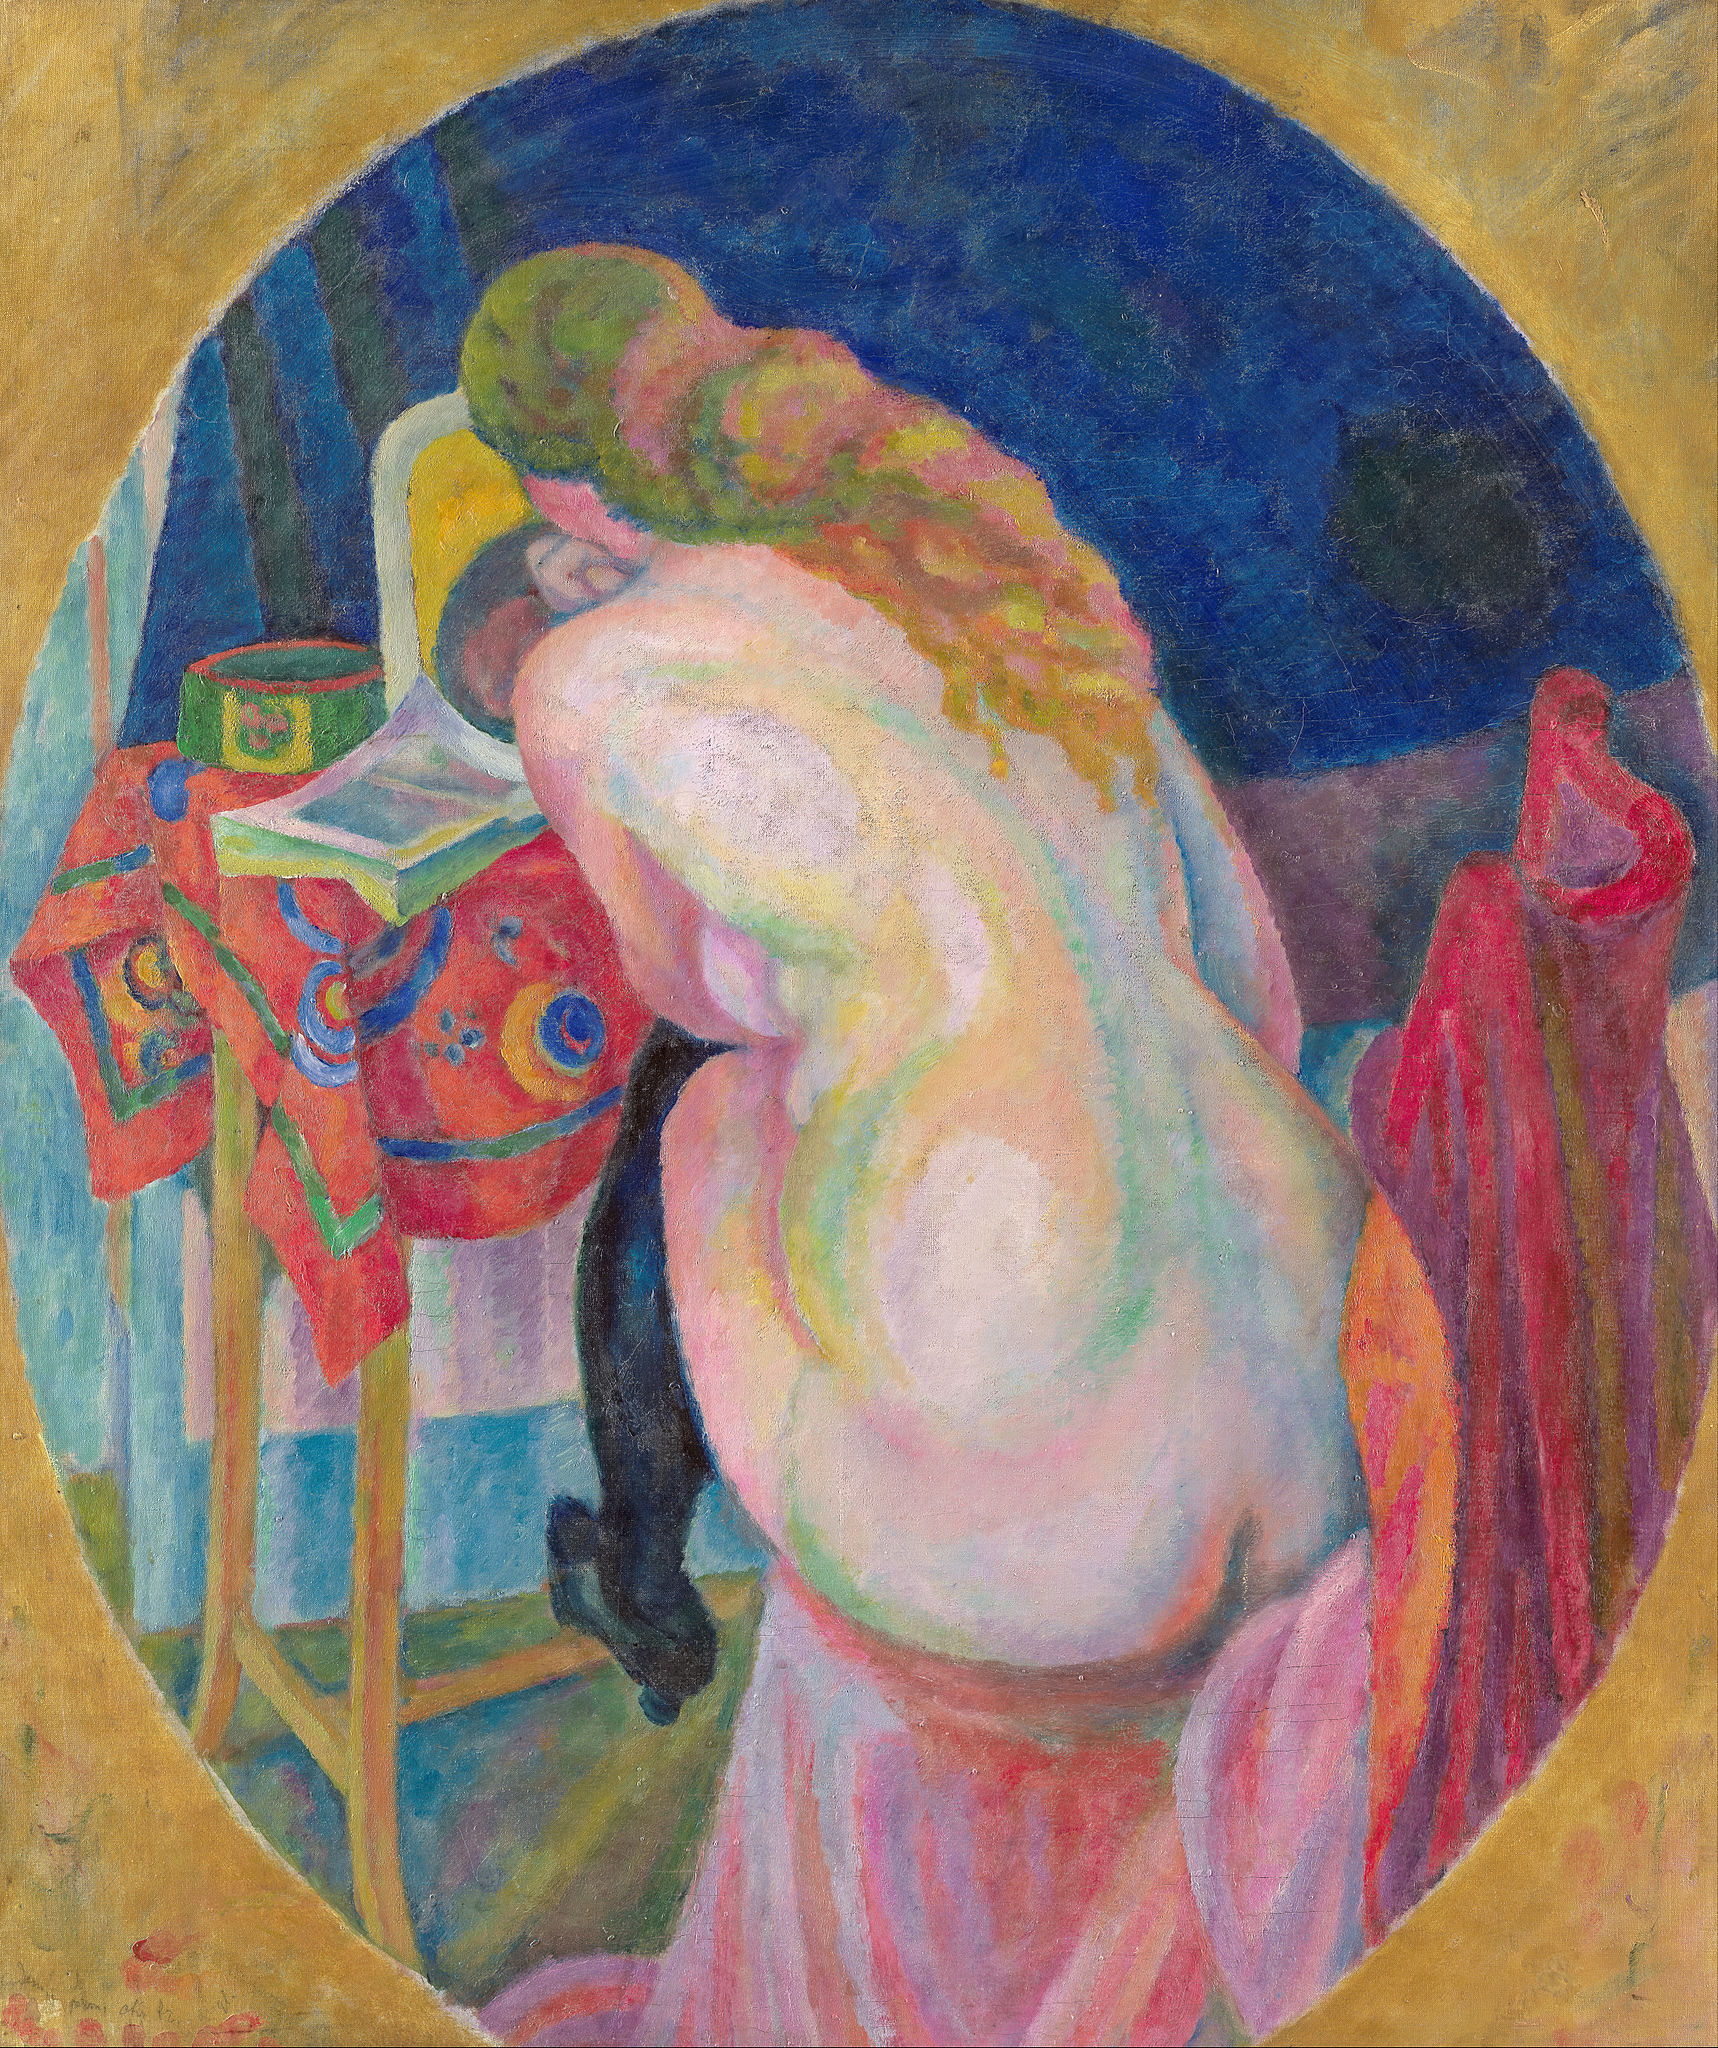 Femme nue lisant by Robert Delaunay - 1915 - 86.2 x 72.4 cm National Gallery of Victoria